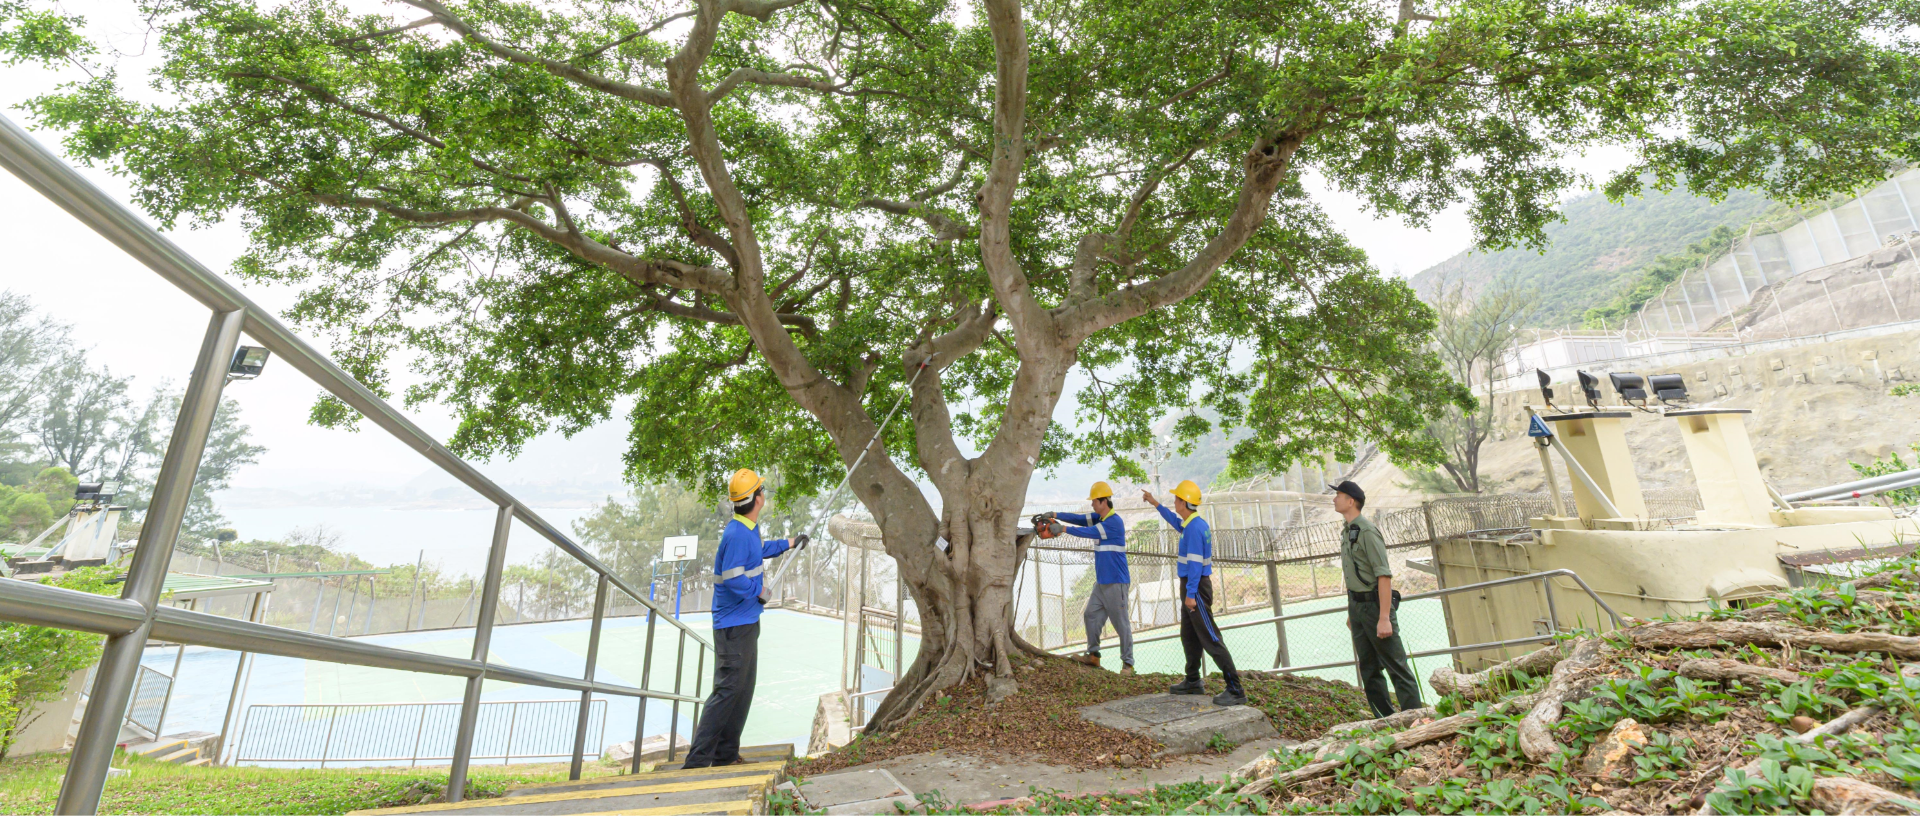 The Department takes timely actions to reduce the risks posed by the trees with potential problems through a systematic methodology and procedures.